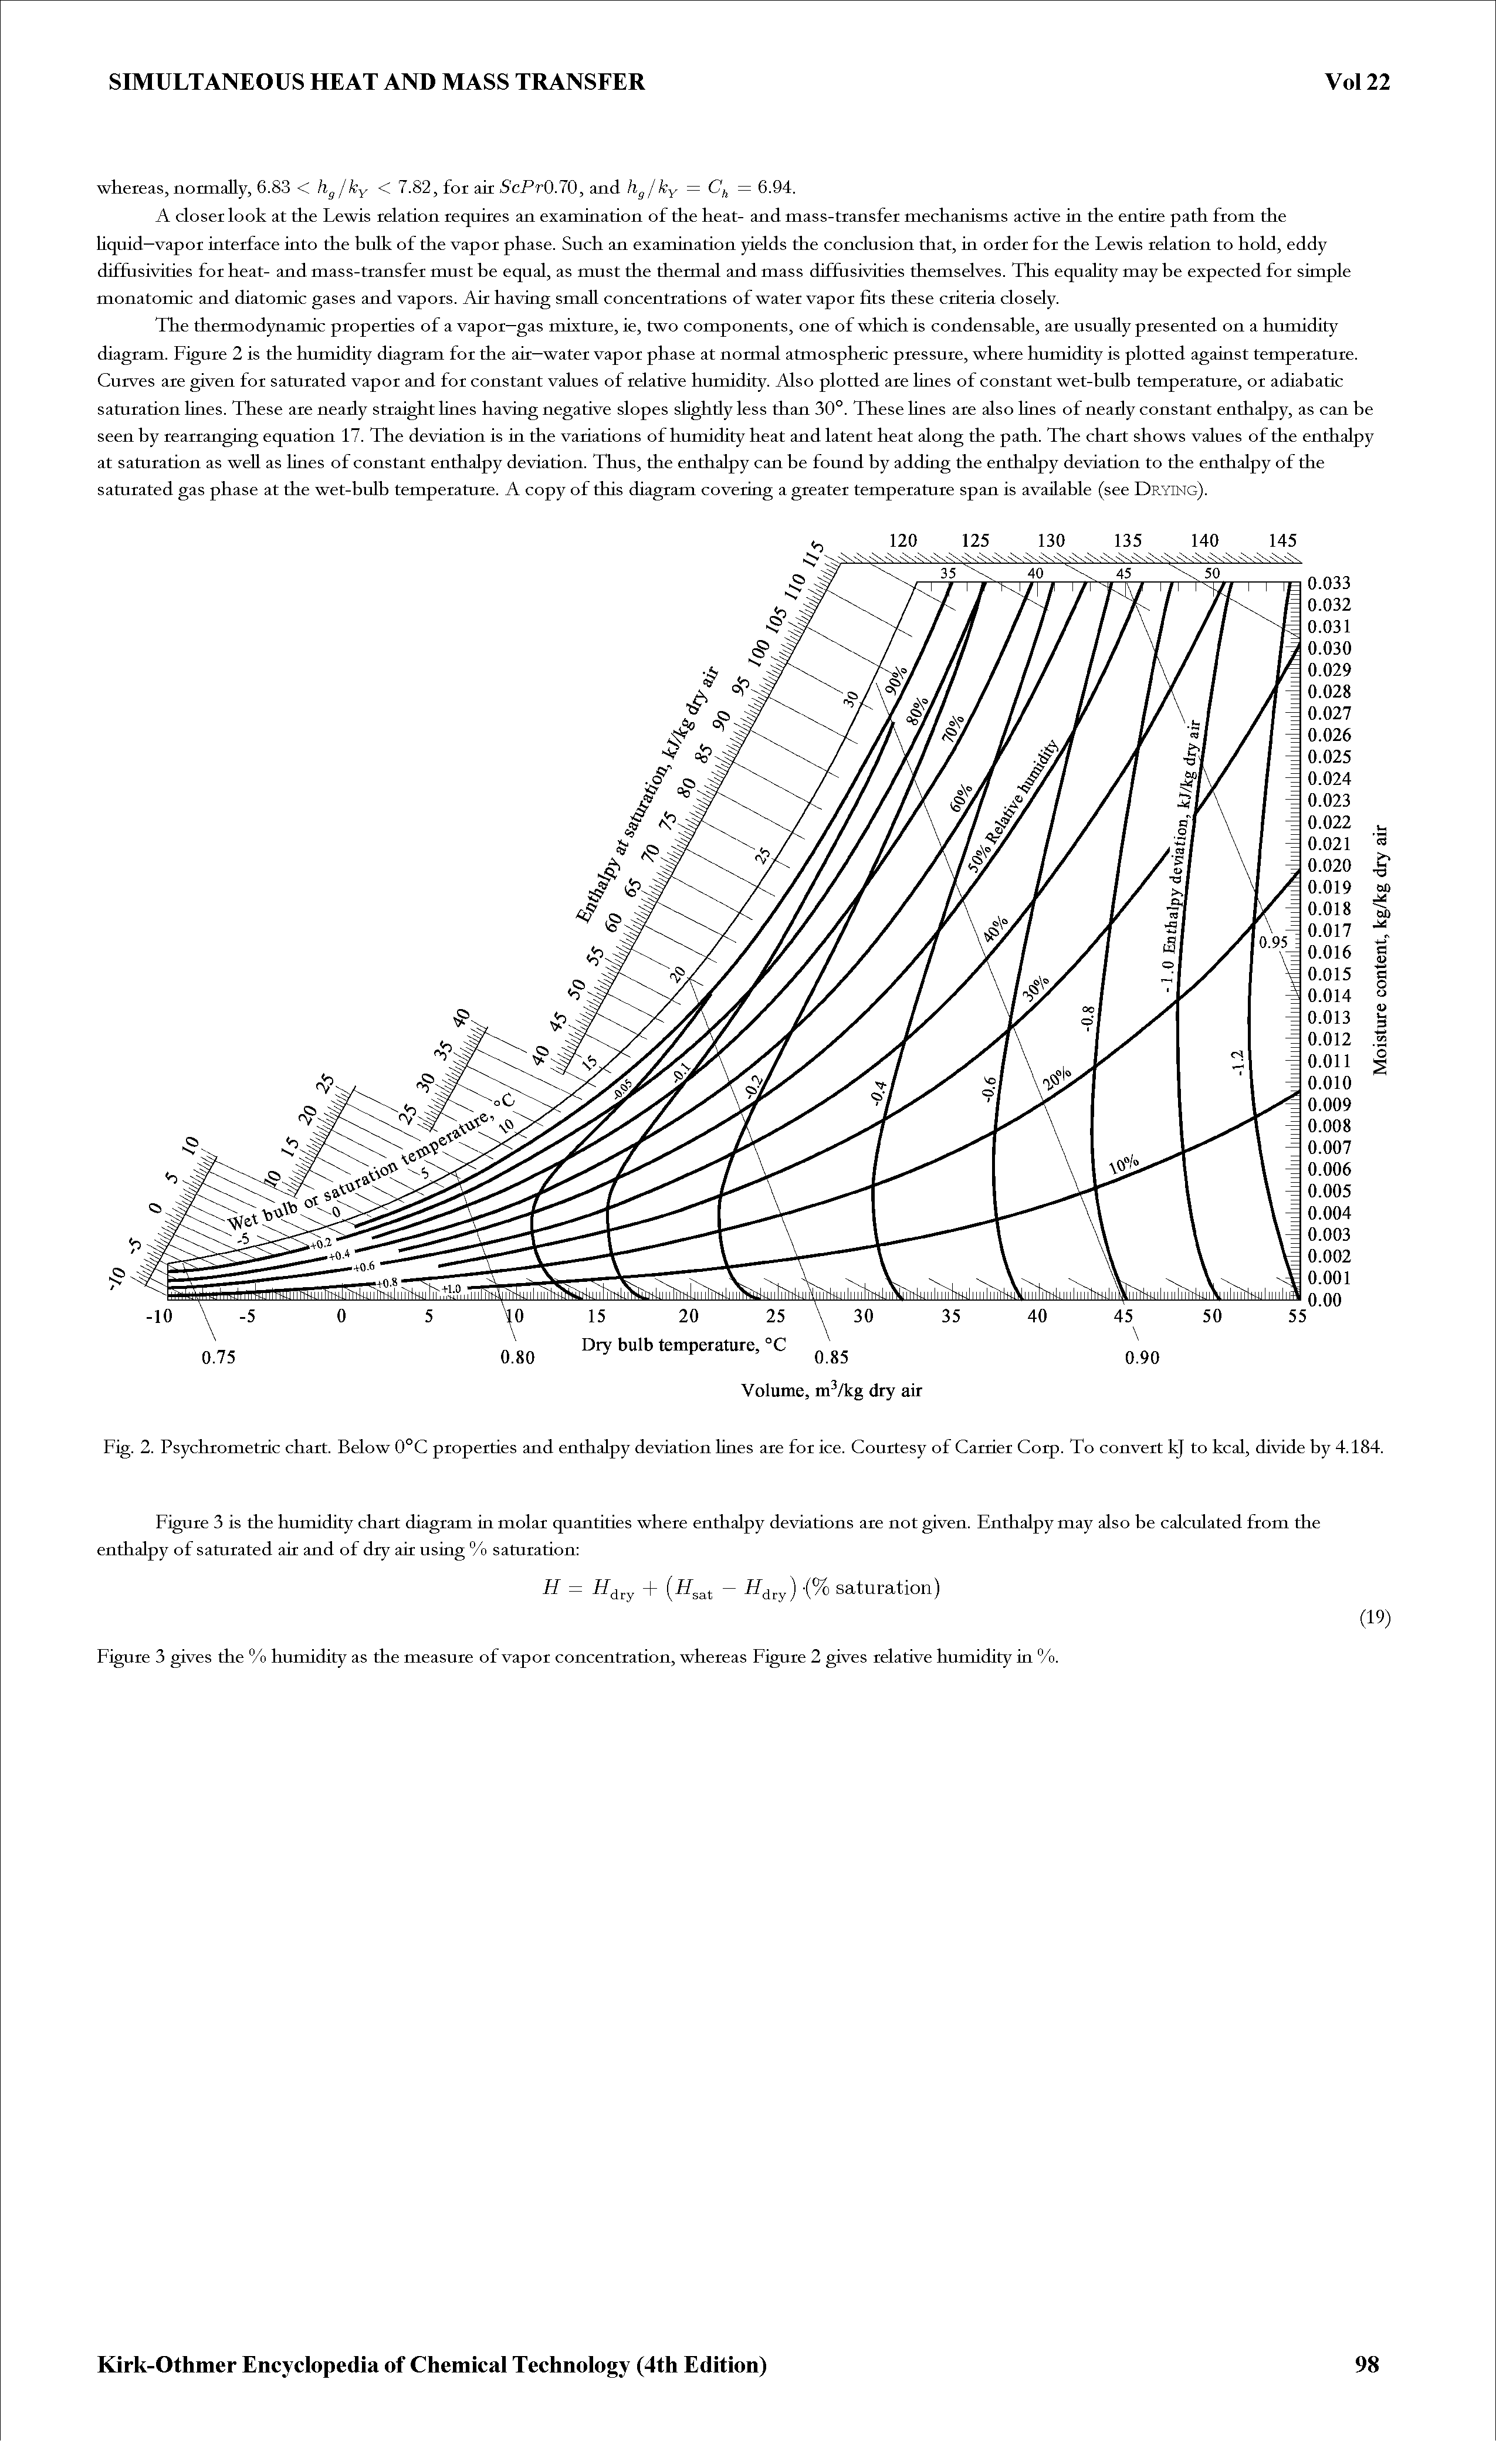 Fig. 2. Psychrometric chart. Below 0°C properties and enthalpy deviation lines ate for ice. Courtesy of Carrier Corp. To convert kj to kcal, divide by 4.184.